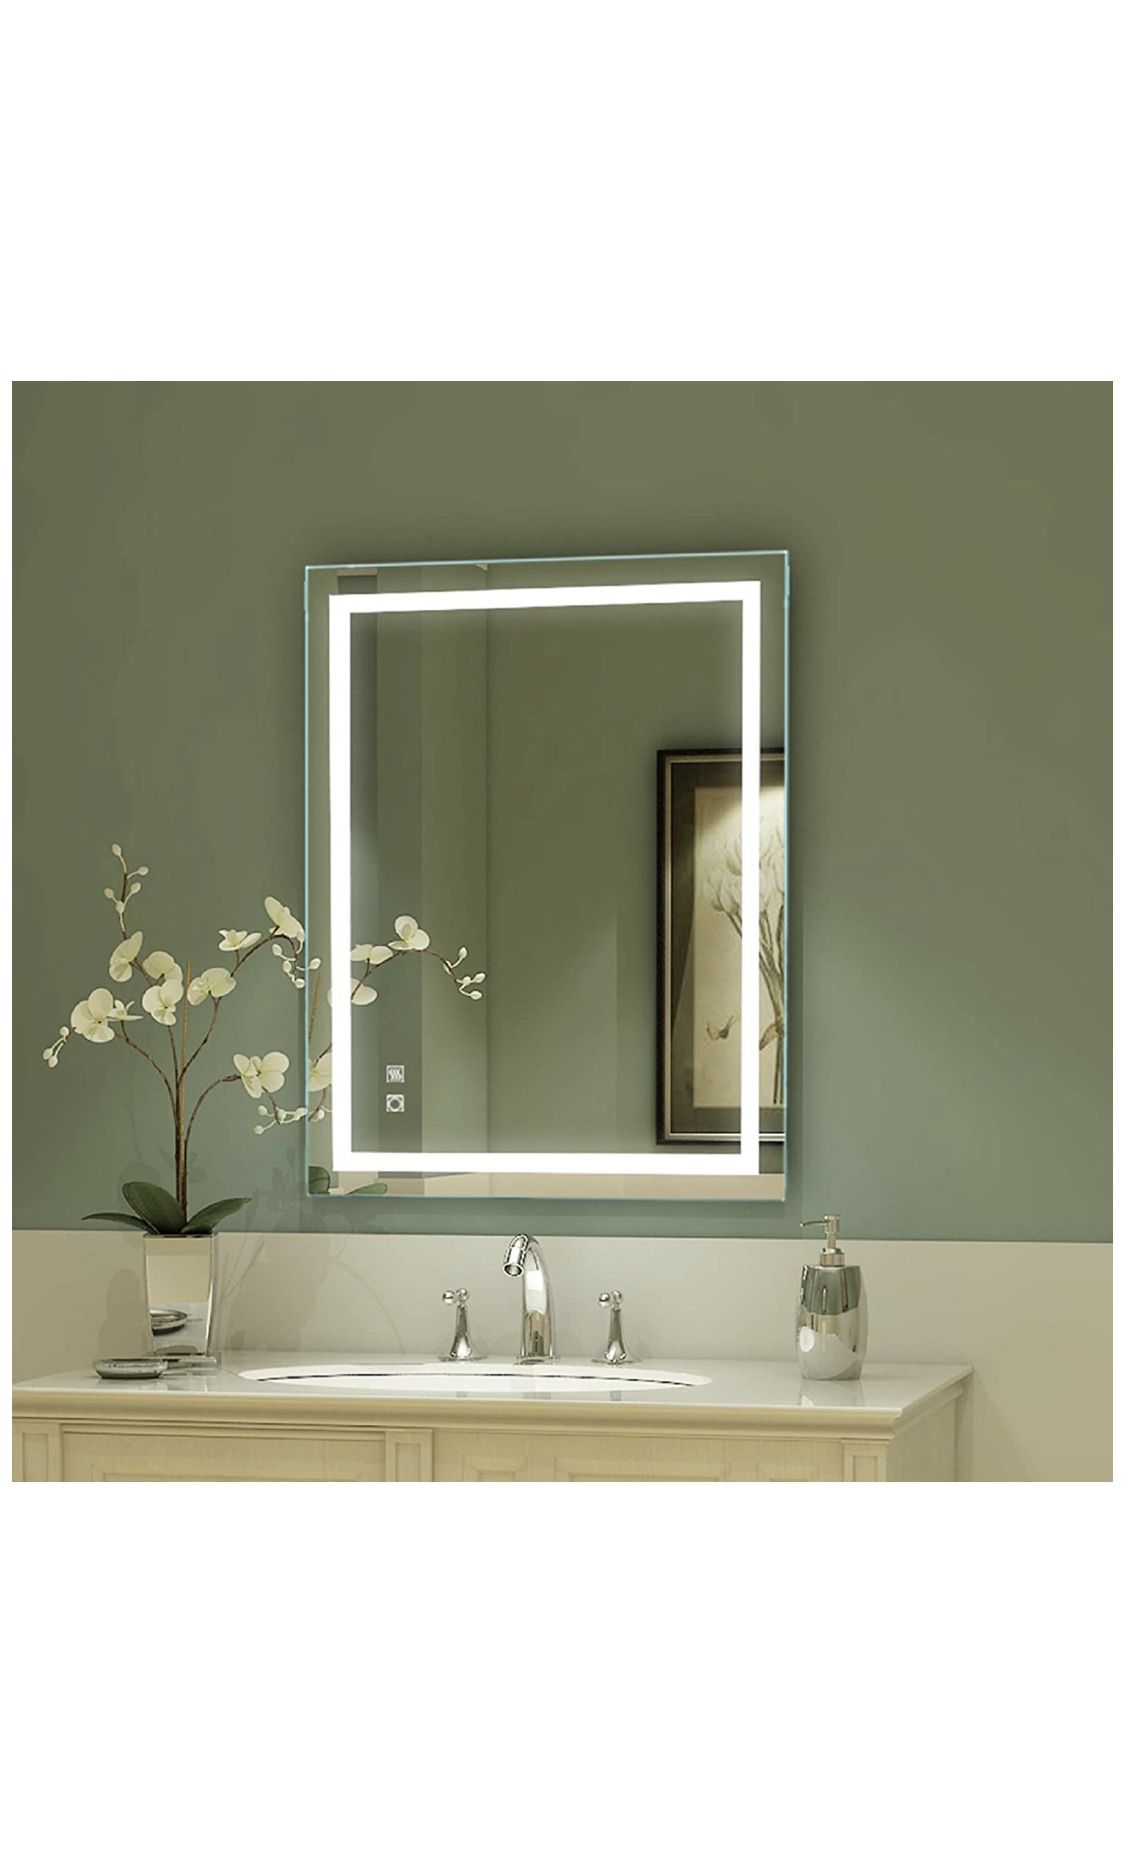 LED Bathroom Mirror, 36 x 28 inch, Anti Fog, Dimmable, Touch Button, Superslim,90+ CRI, Waterproof IP44,Both Vertical and Horizontal Wall Mounted Way